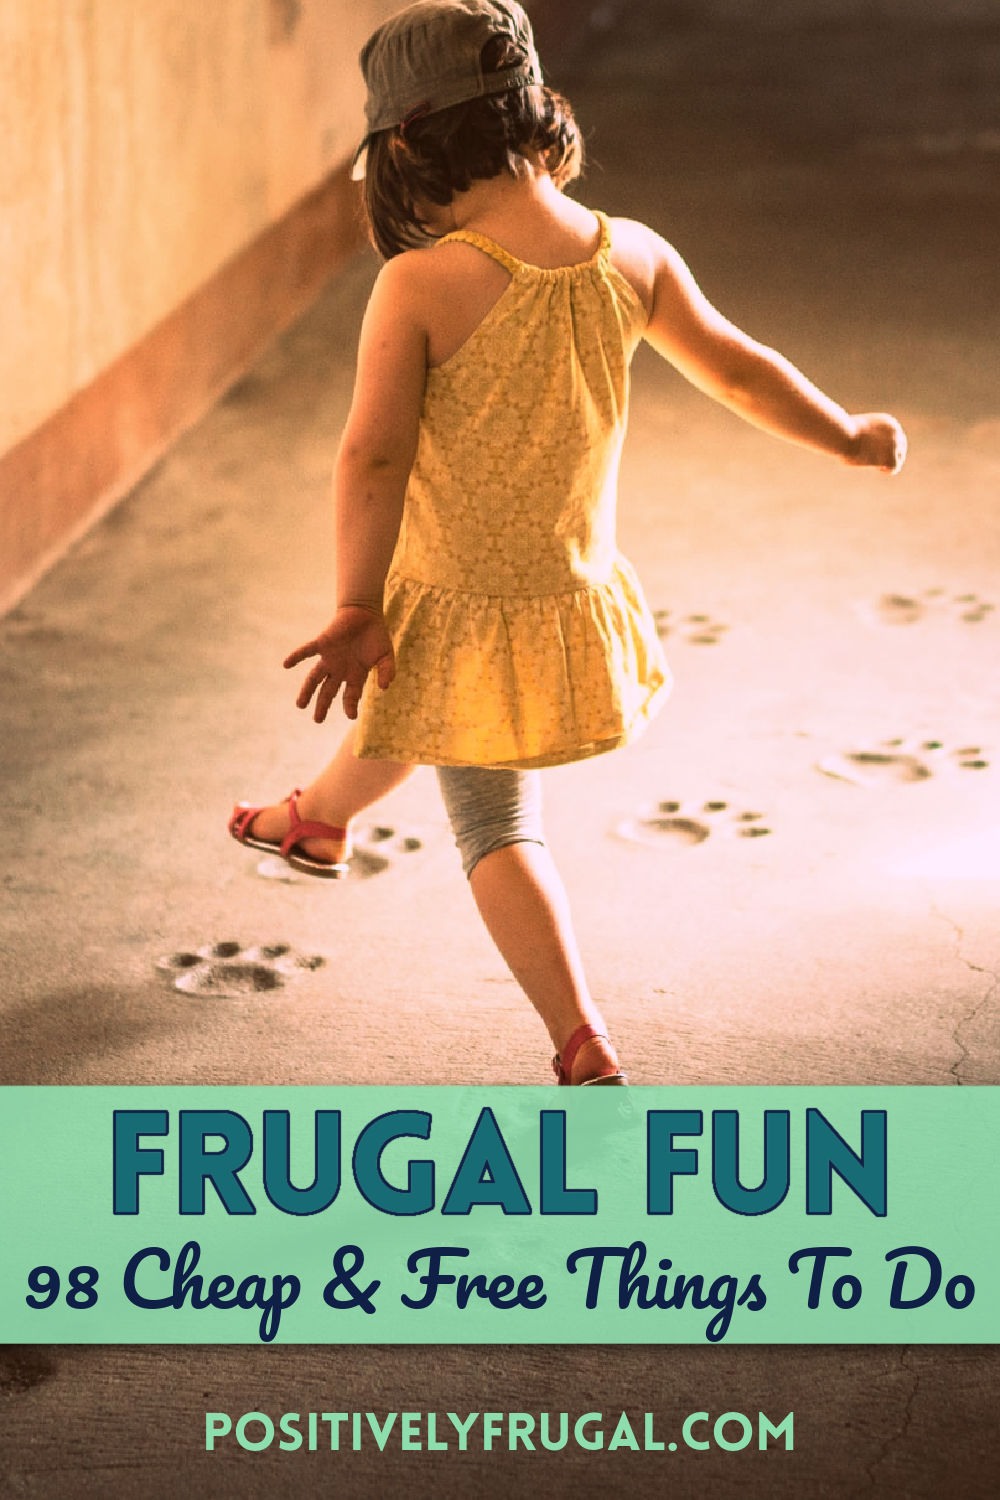 Frugal Fun 98 Cheap and Free Things To do by PositivelyFrugal.com